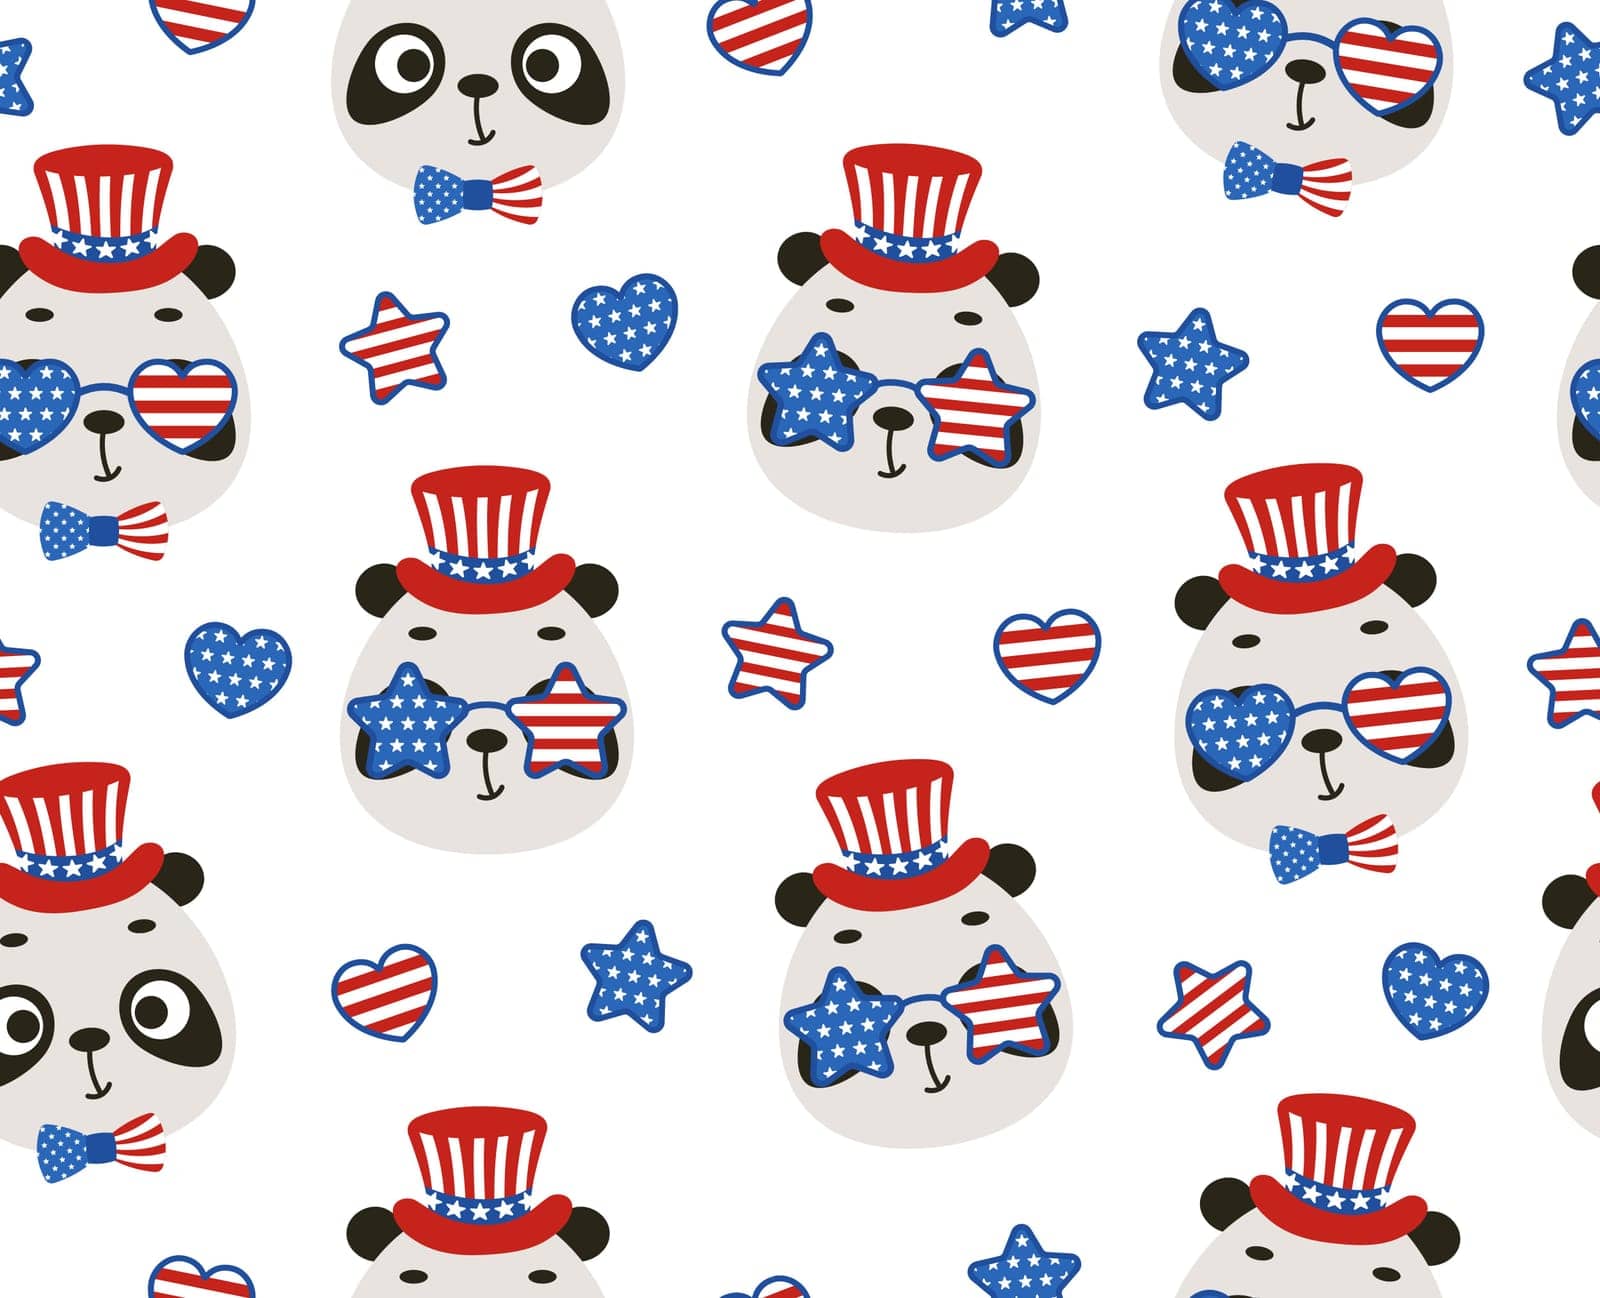 Cute little panda head in USA patriotic hat seamless childish pattern. Funny cartoon animal character for fabric, wrapping, textile, wallpaper, apparel. Vector illustration